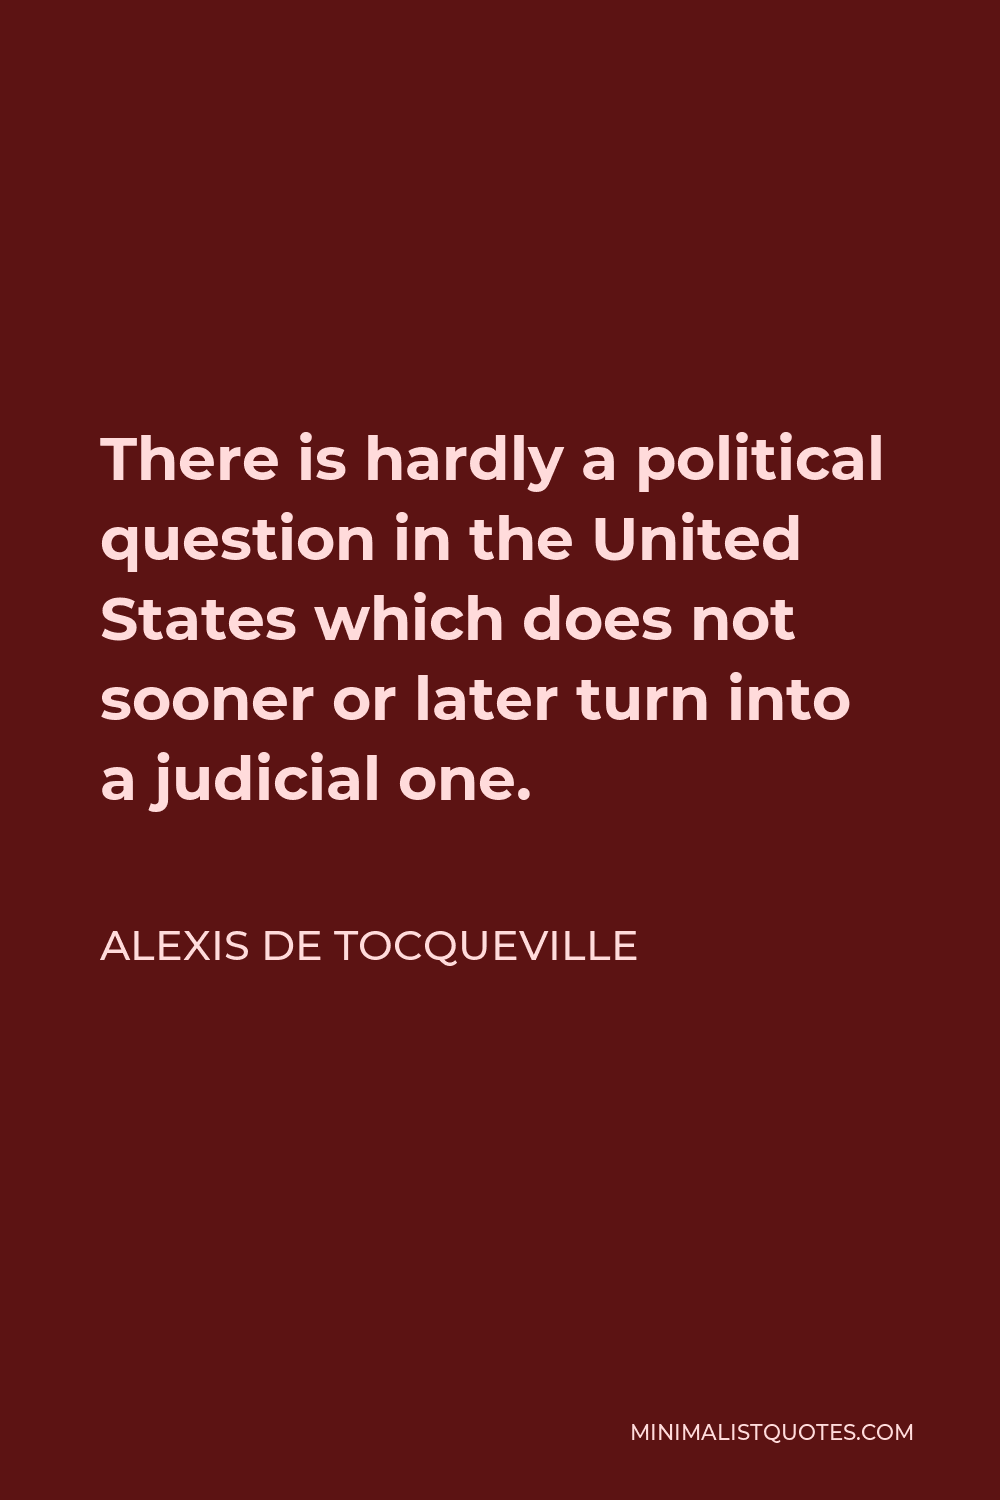 Alexis de Tocqueville Quote - There is hardly a political question in the United States which does not sooner or later turn into a judicial one.